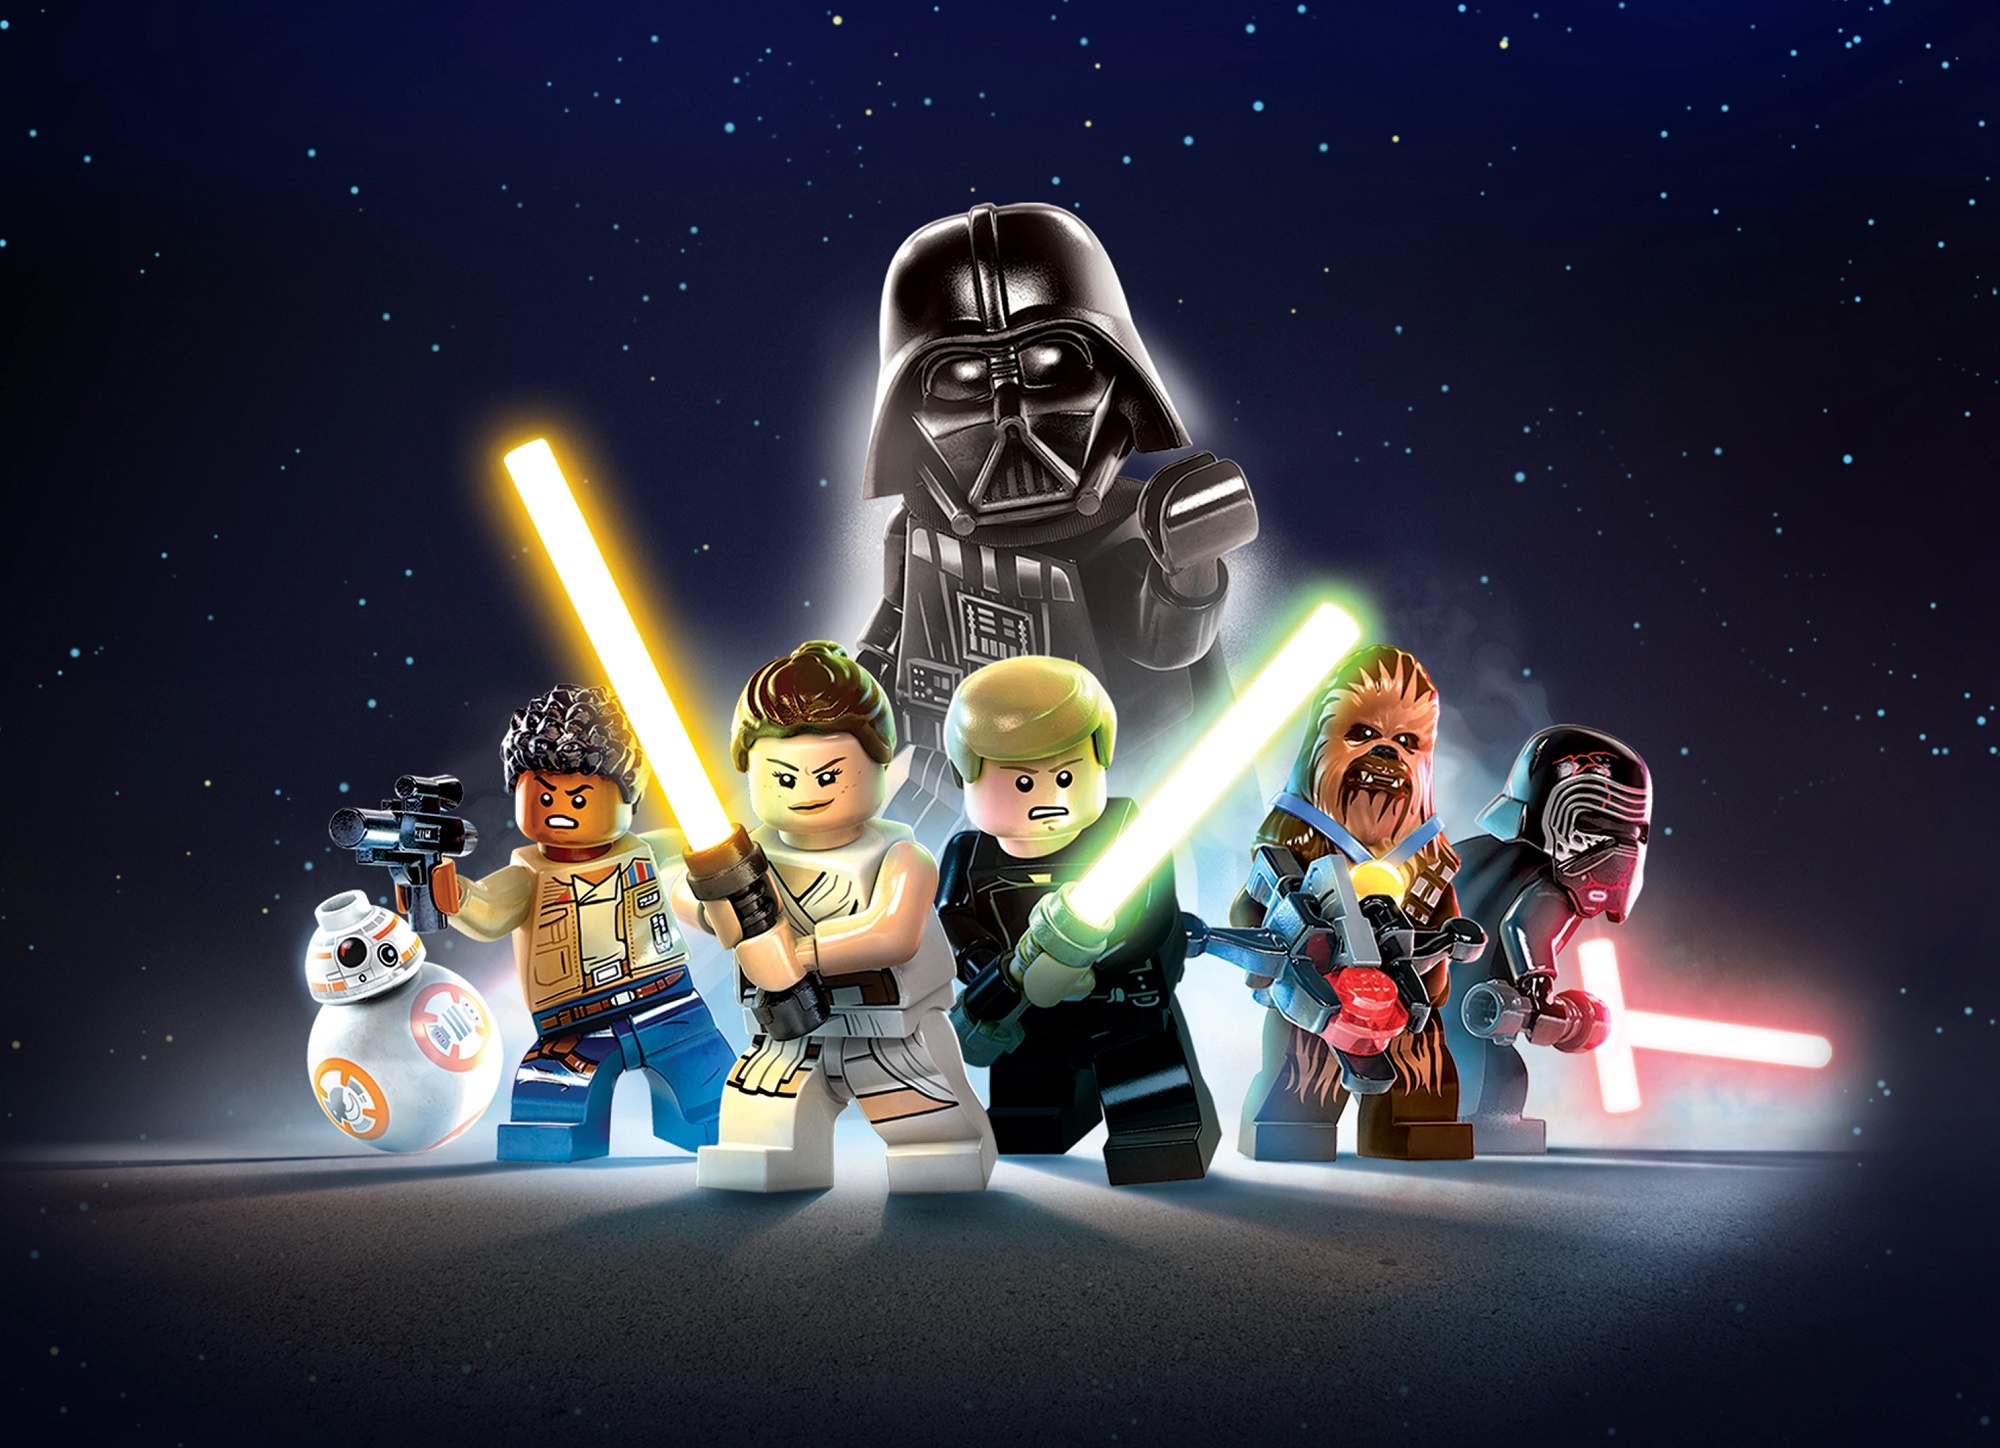 Game review, LEGO Star Wars verdict, Expert opinion, Must-play for fans, 2000x1450 HD Desktop